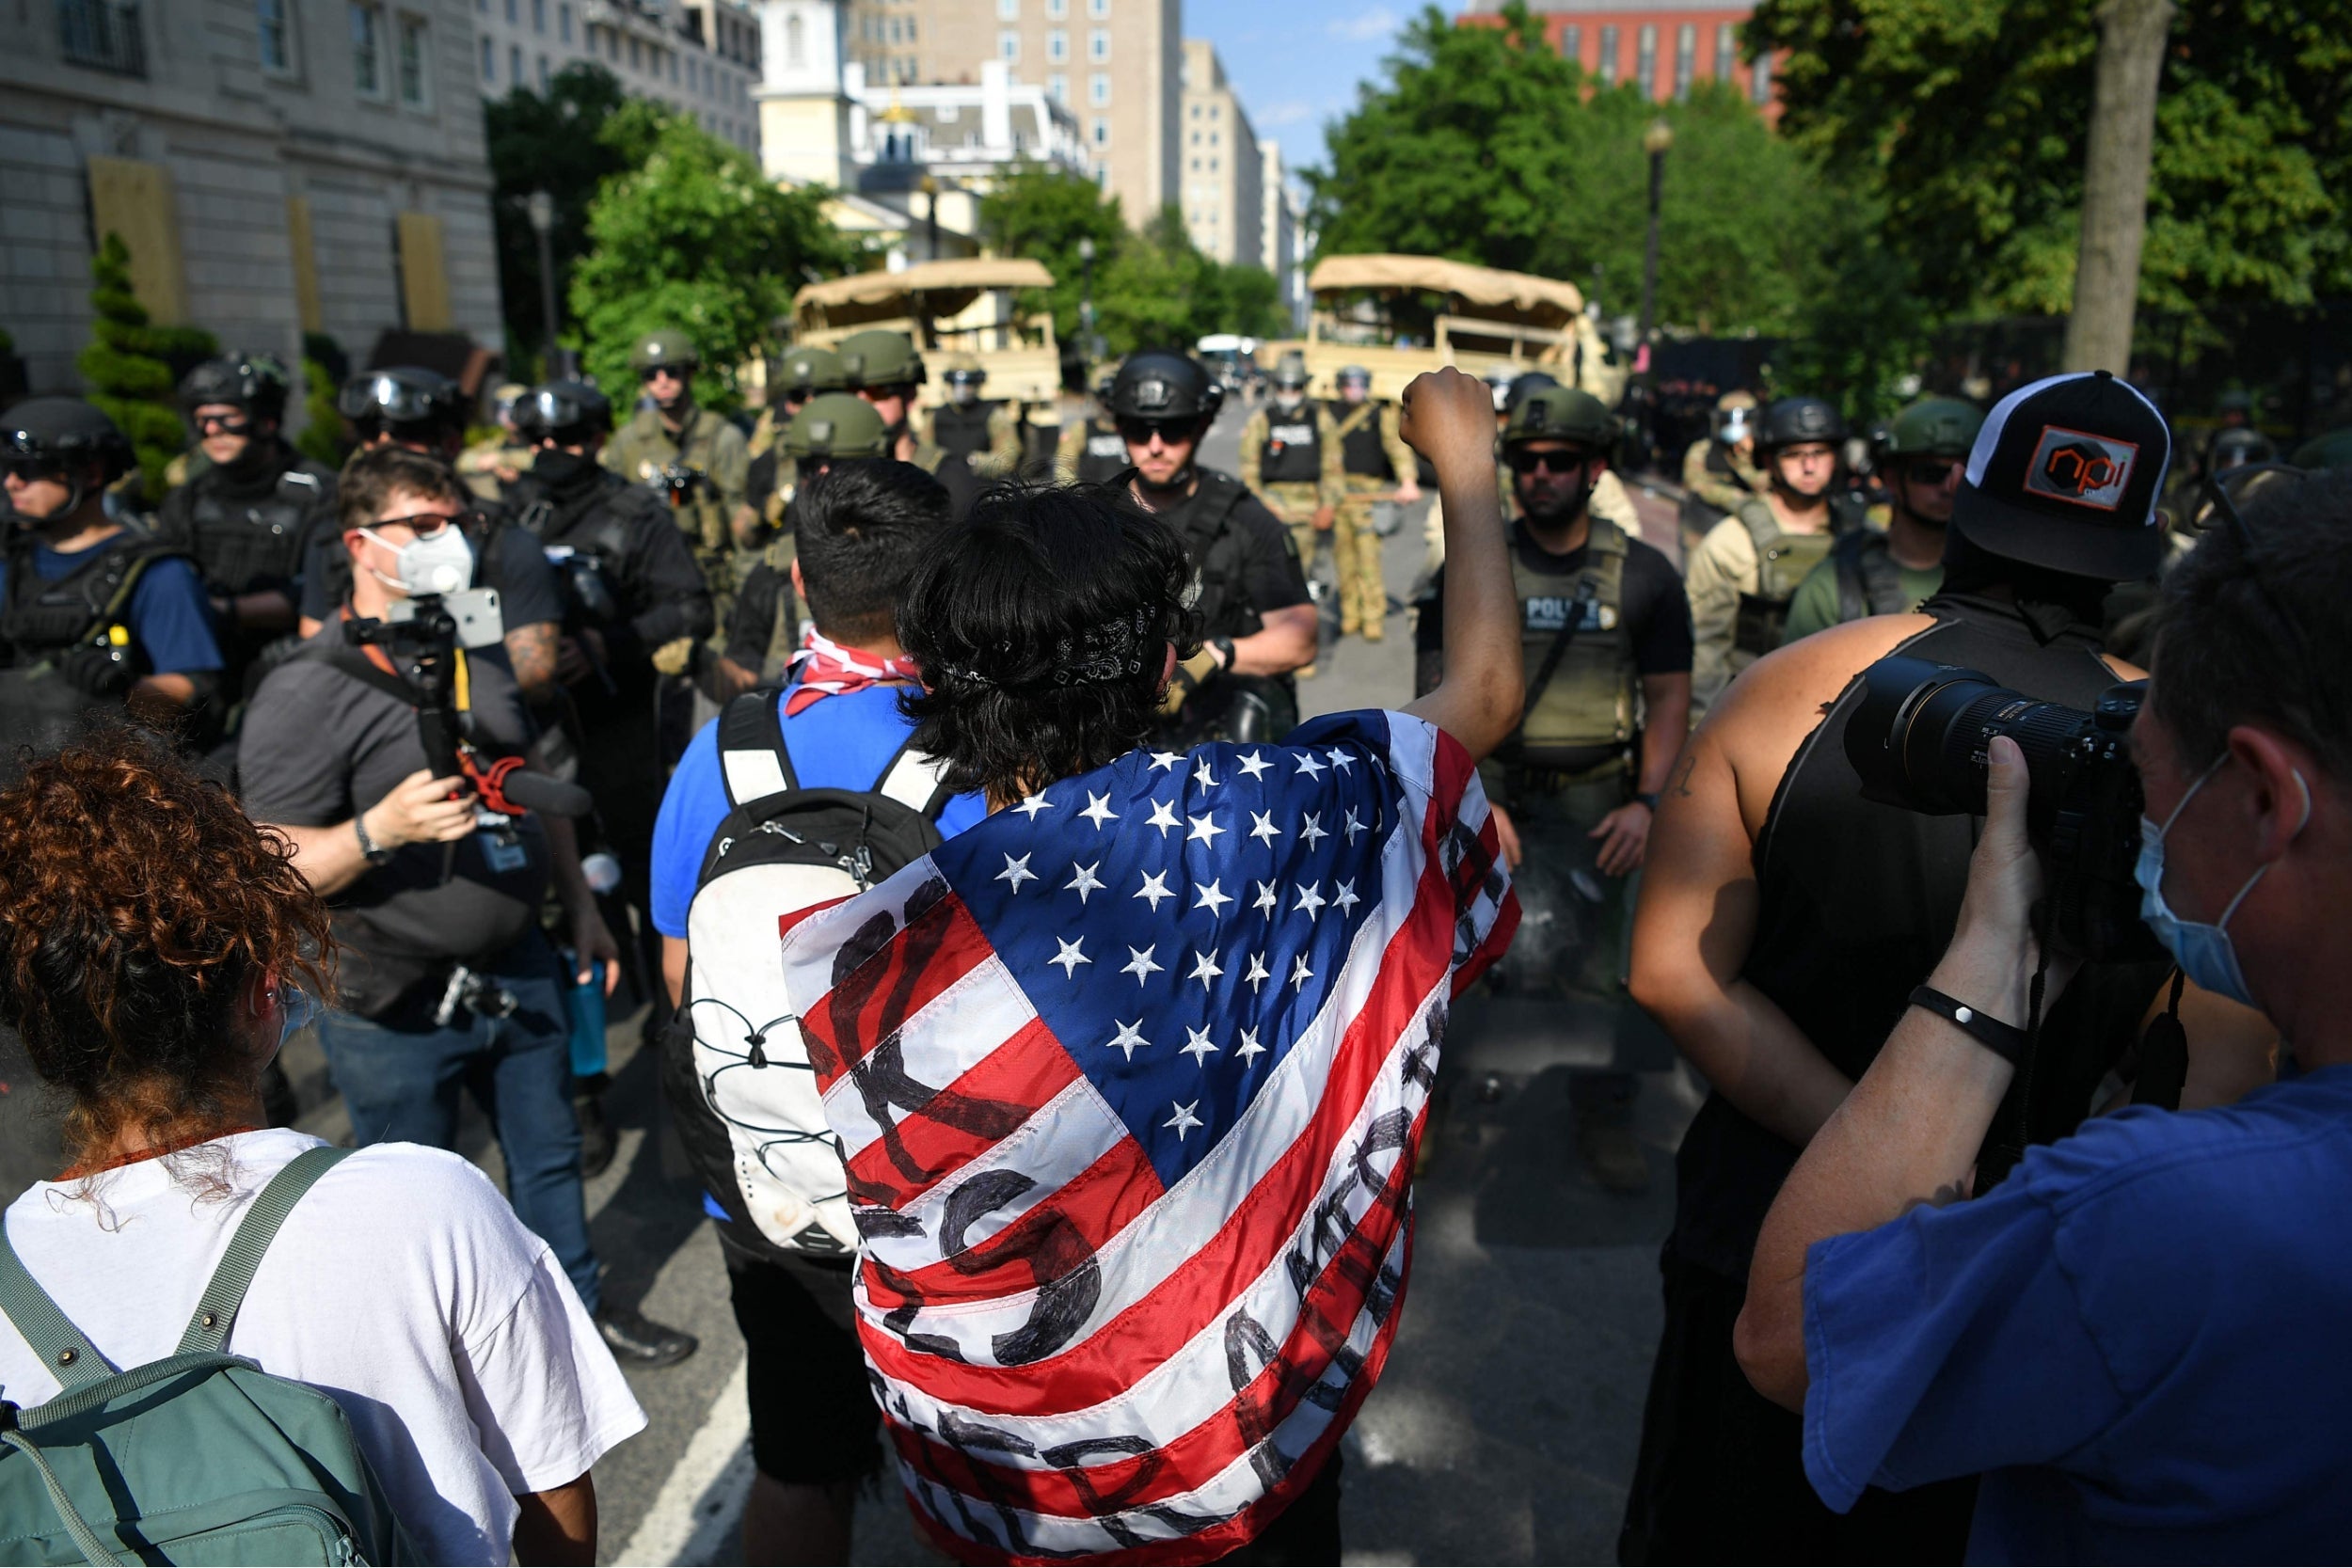 Demonstrators face police and security forces on H St near the White House, during protests over the death of George Floyd